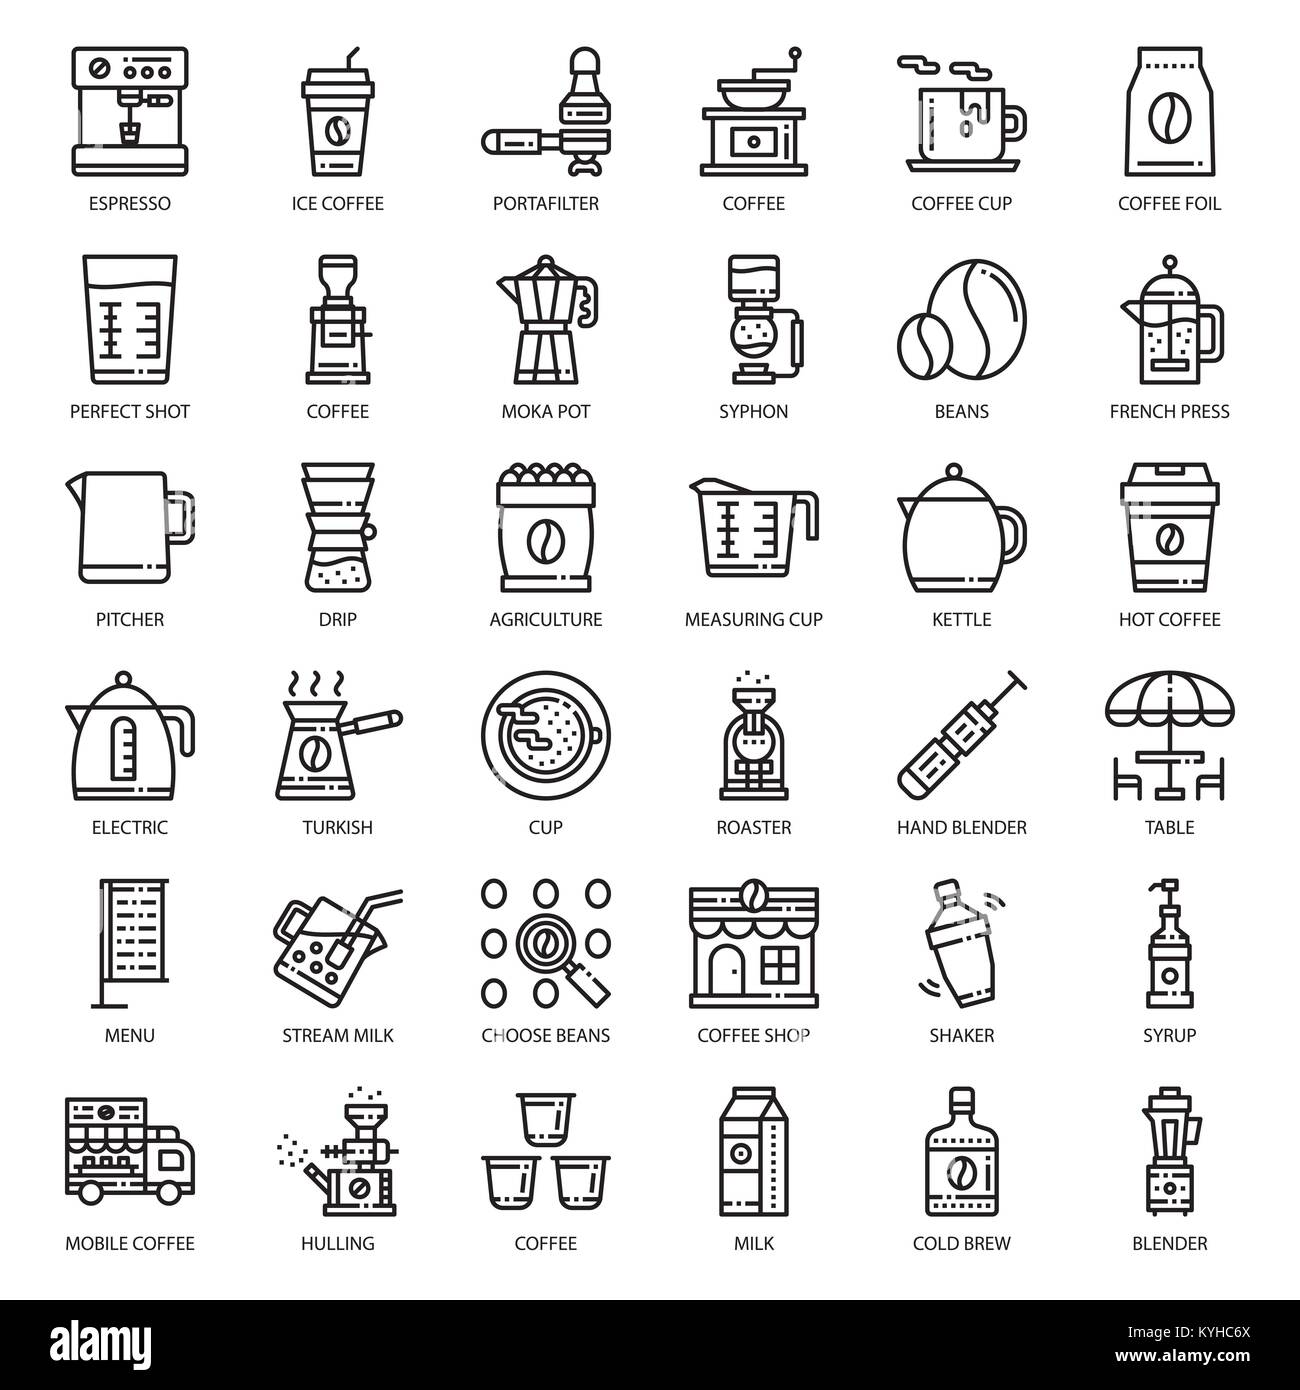 coffee's equipment icon set, isolated on white background Stock Vector